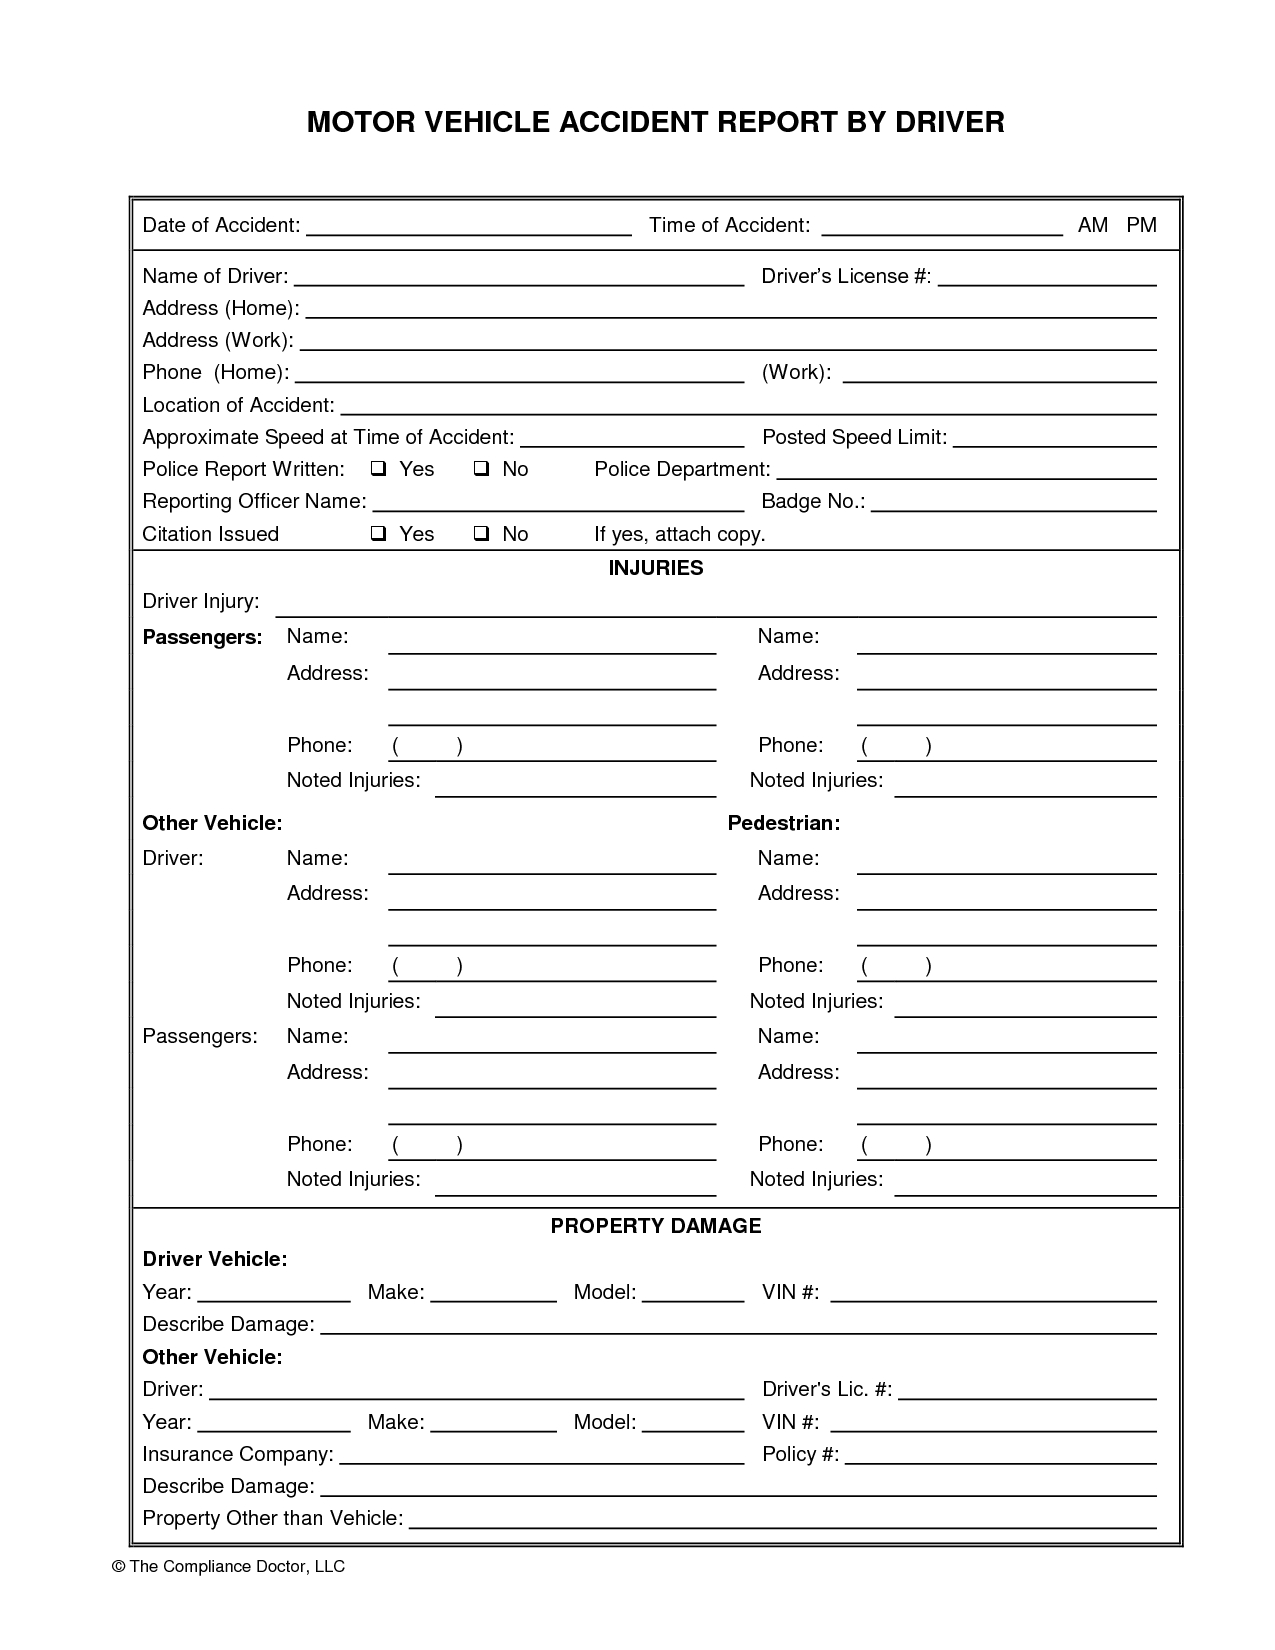 Eb9 Vehicle Damage Report Template | Wiring Library Pertaining To Motor Vehicle Accident Report Form Template